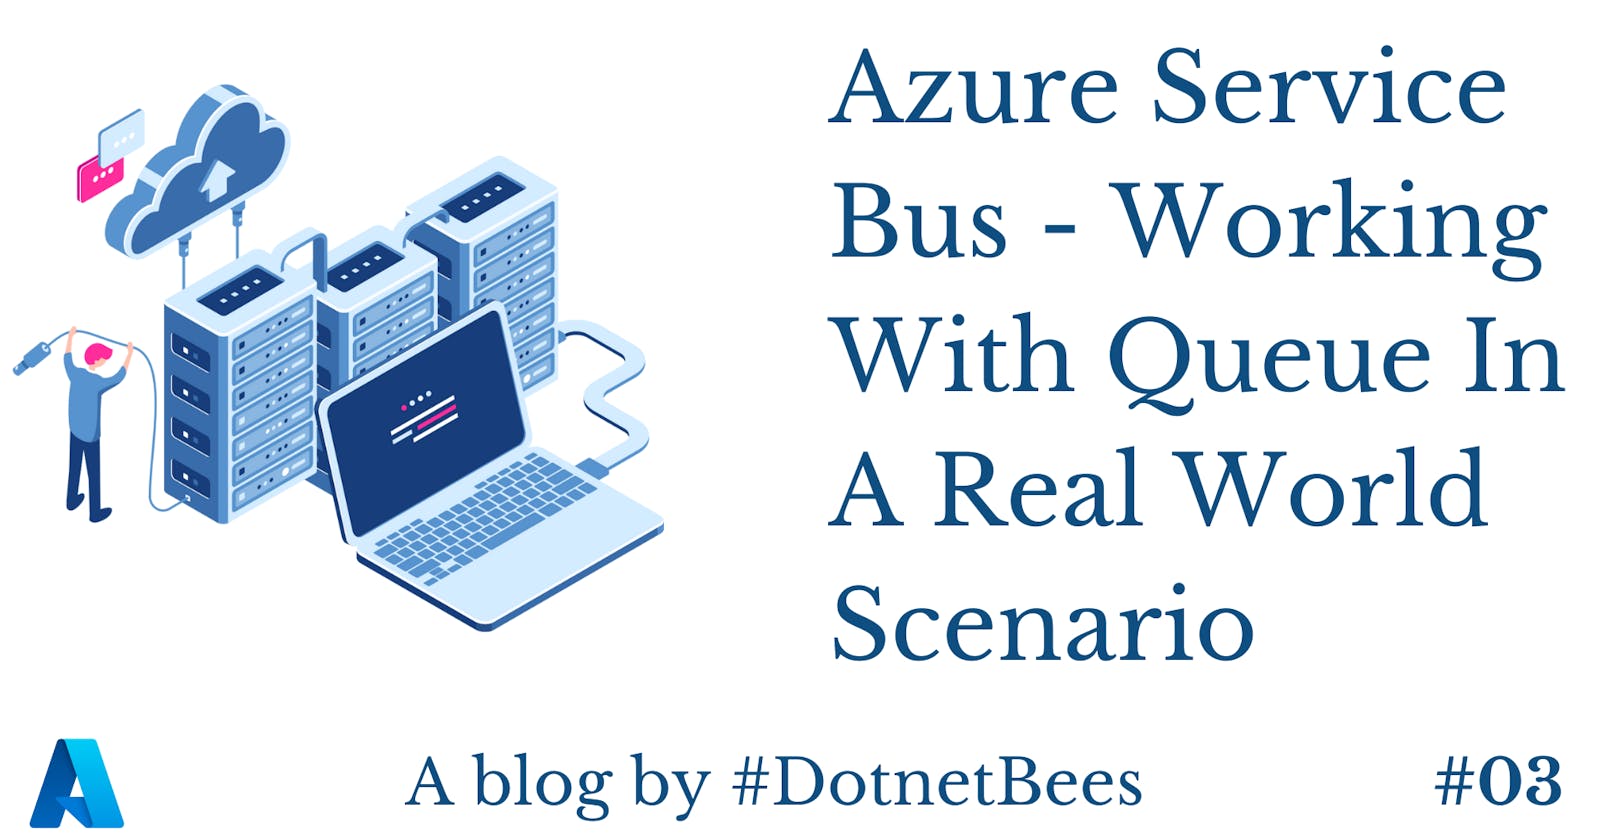 Azure Service Bus - Working With Queue In A Real World Scenario